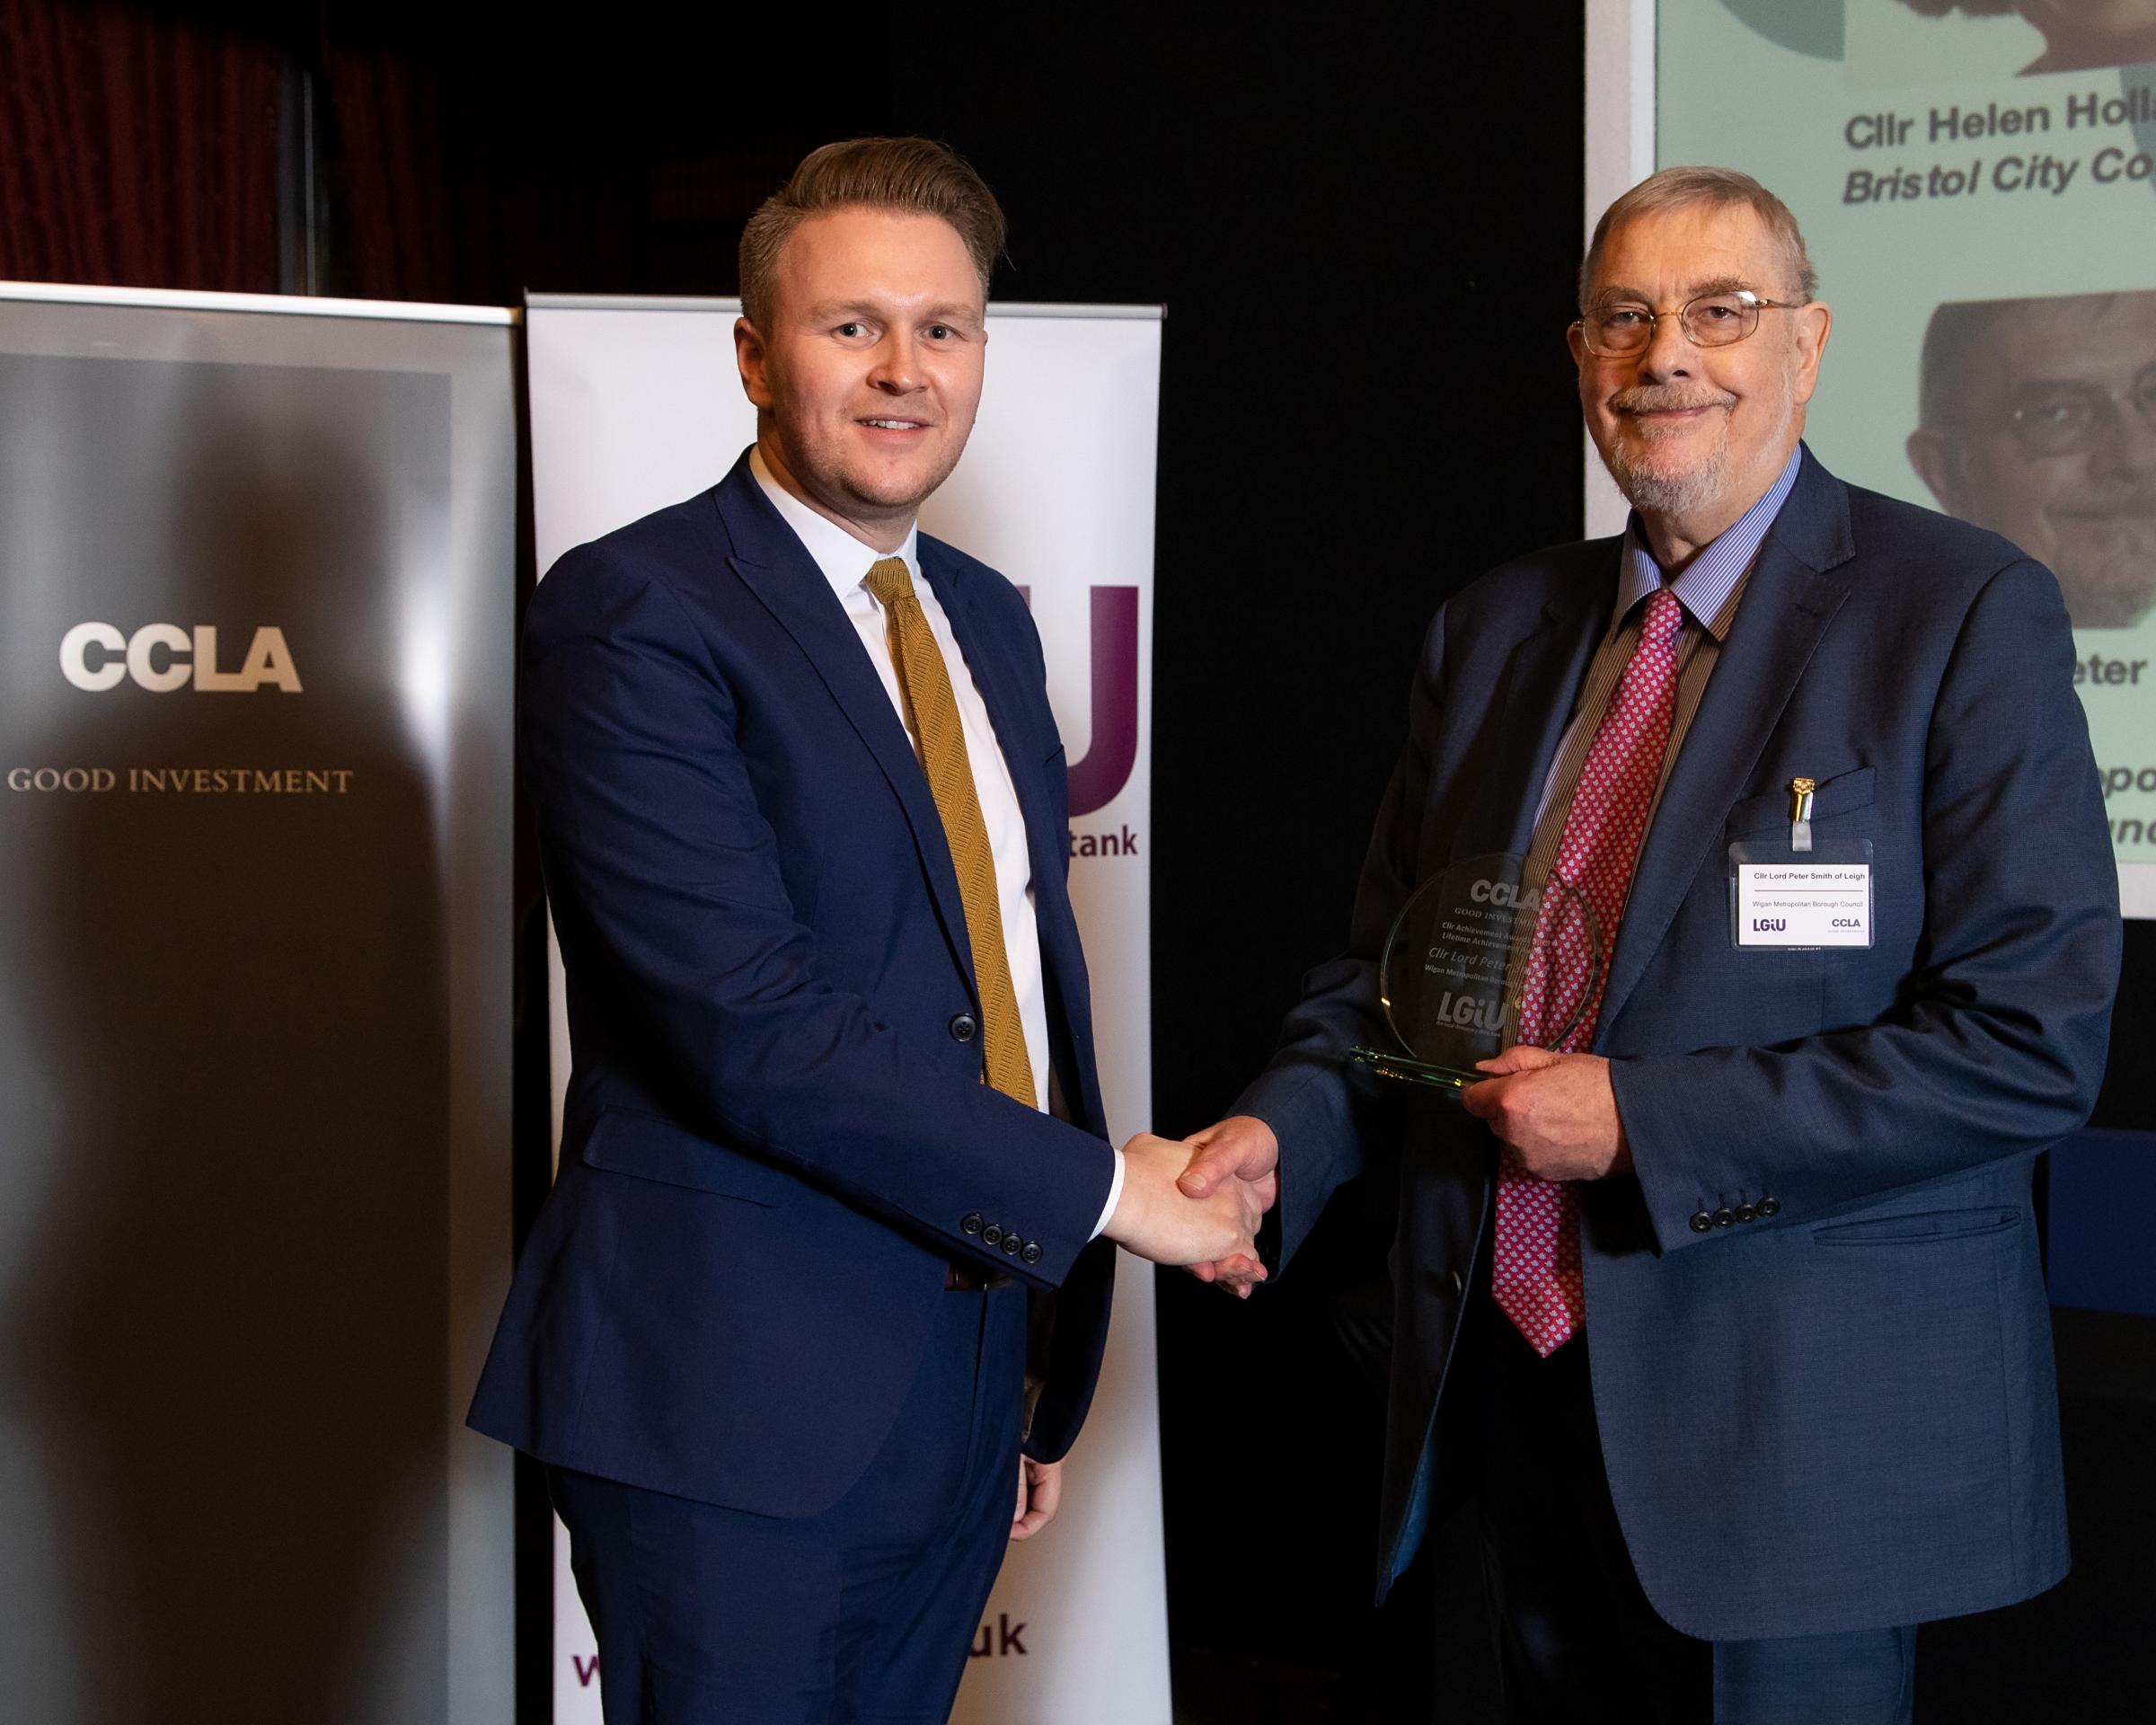 Lord Peter Smith receiving his award from LGiU chair Cllr Michael Payne in 2019